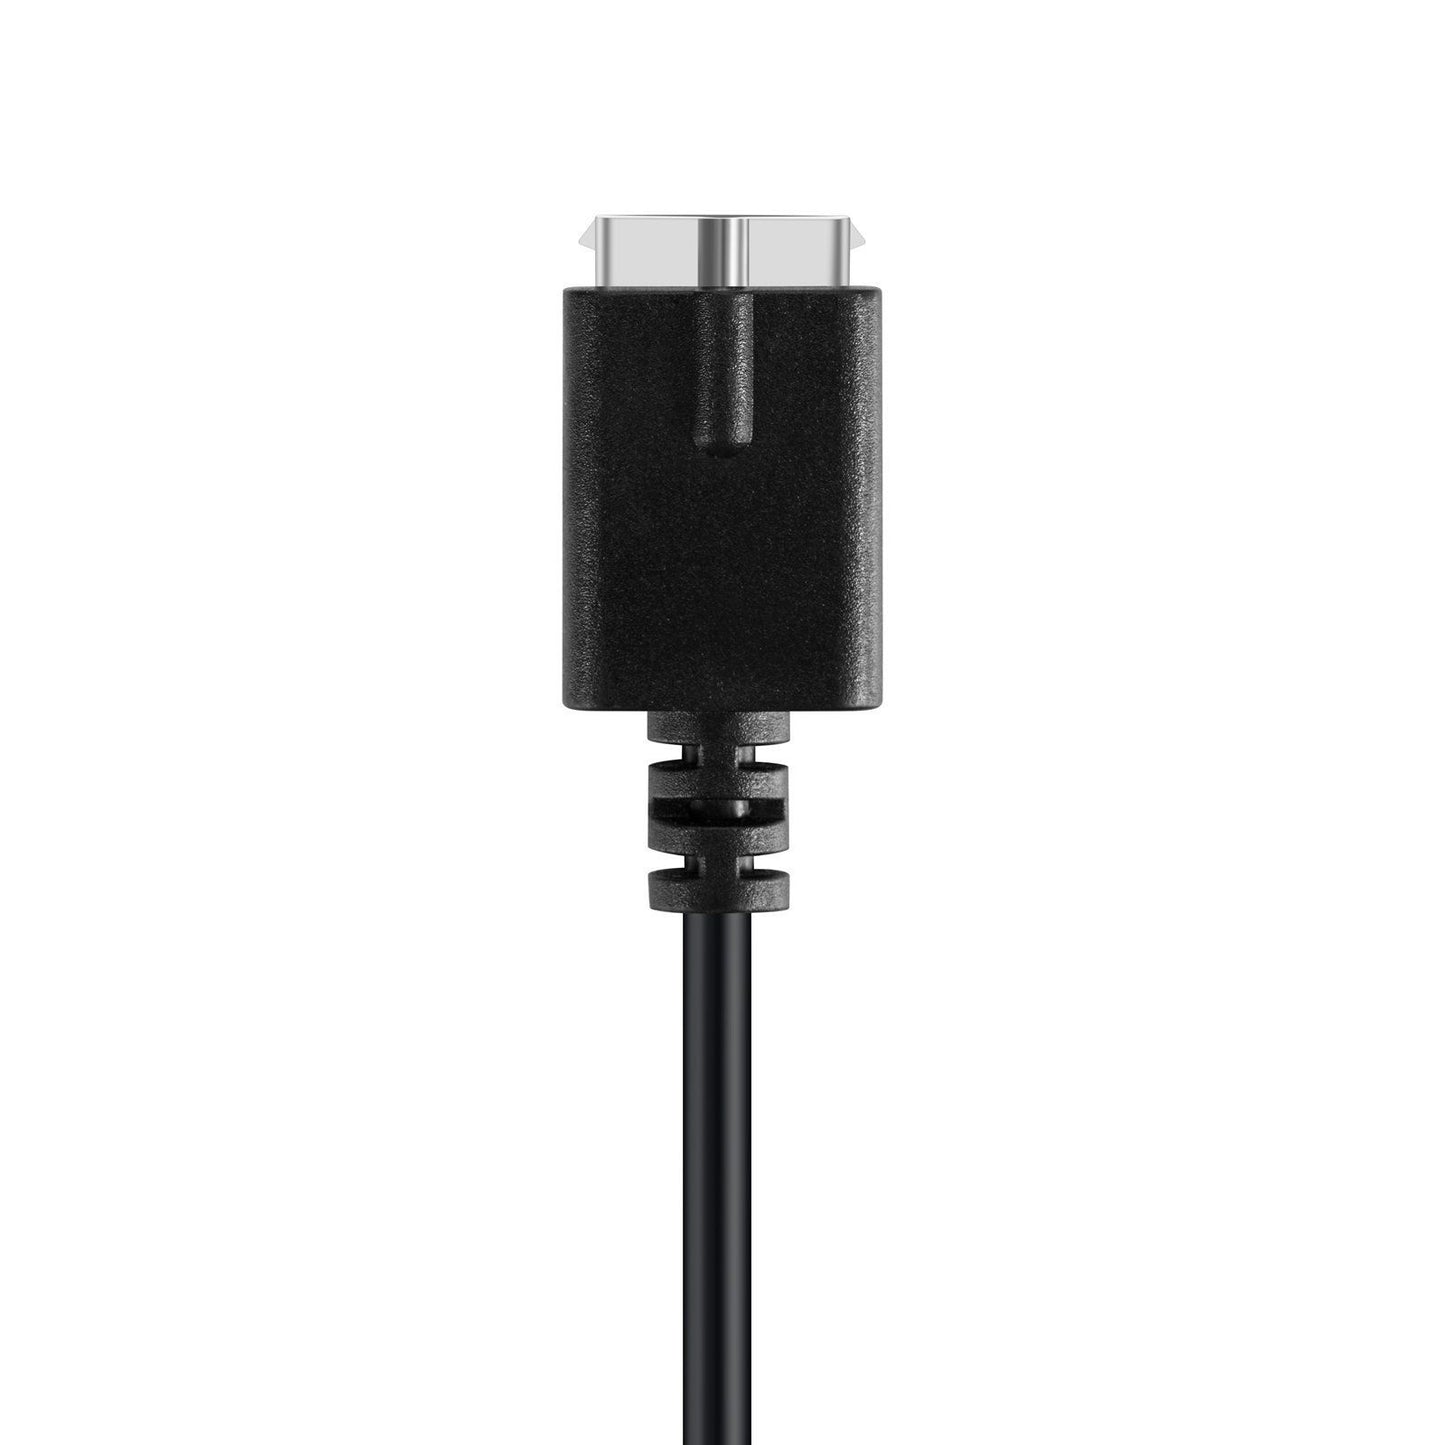 USB Charger for Polar M430